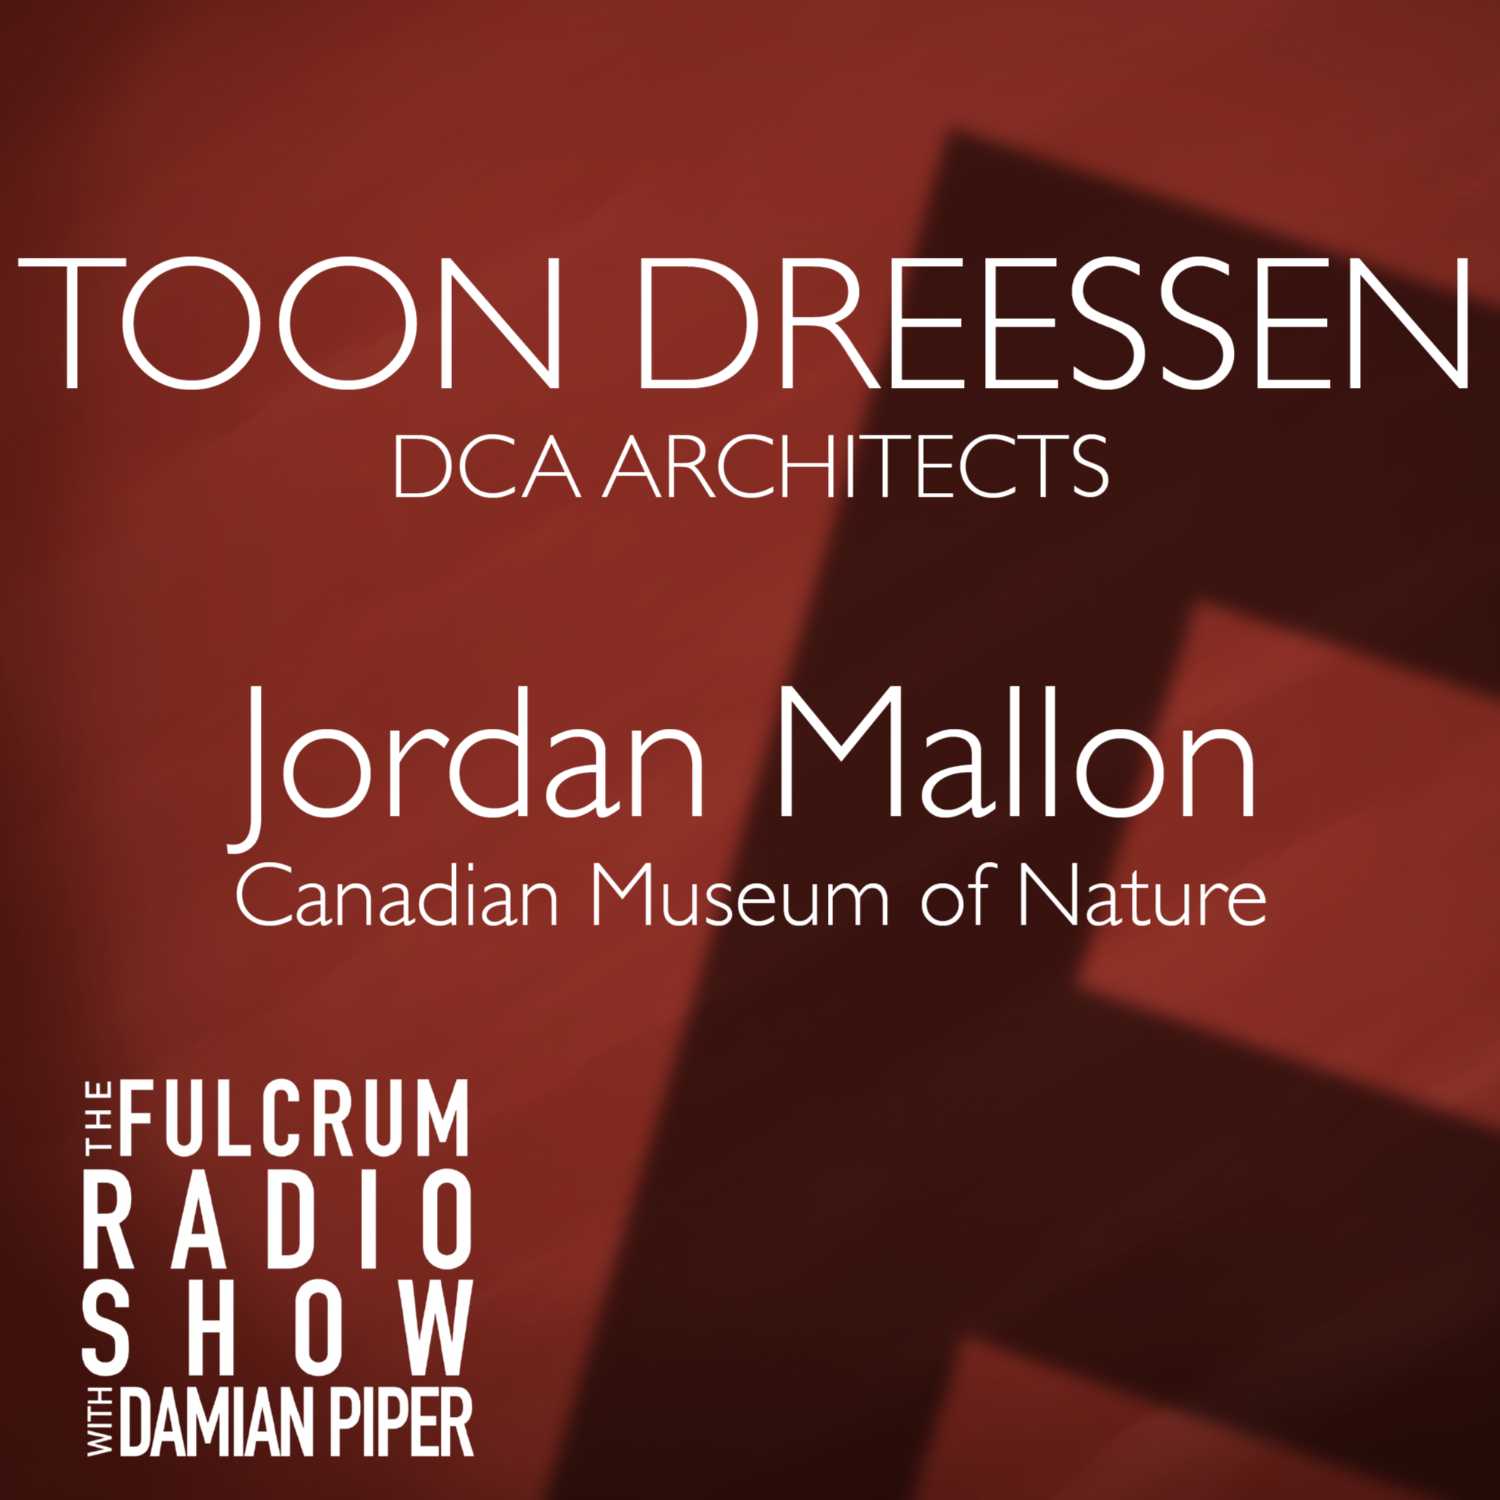 Episode 12: Toon Dreessen, DAC Architects and Dr. Jordan Mallon, Canadian Museum of Nature.